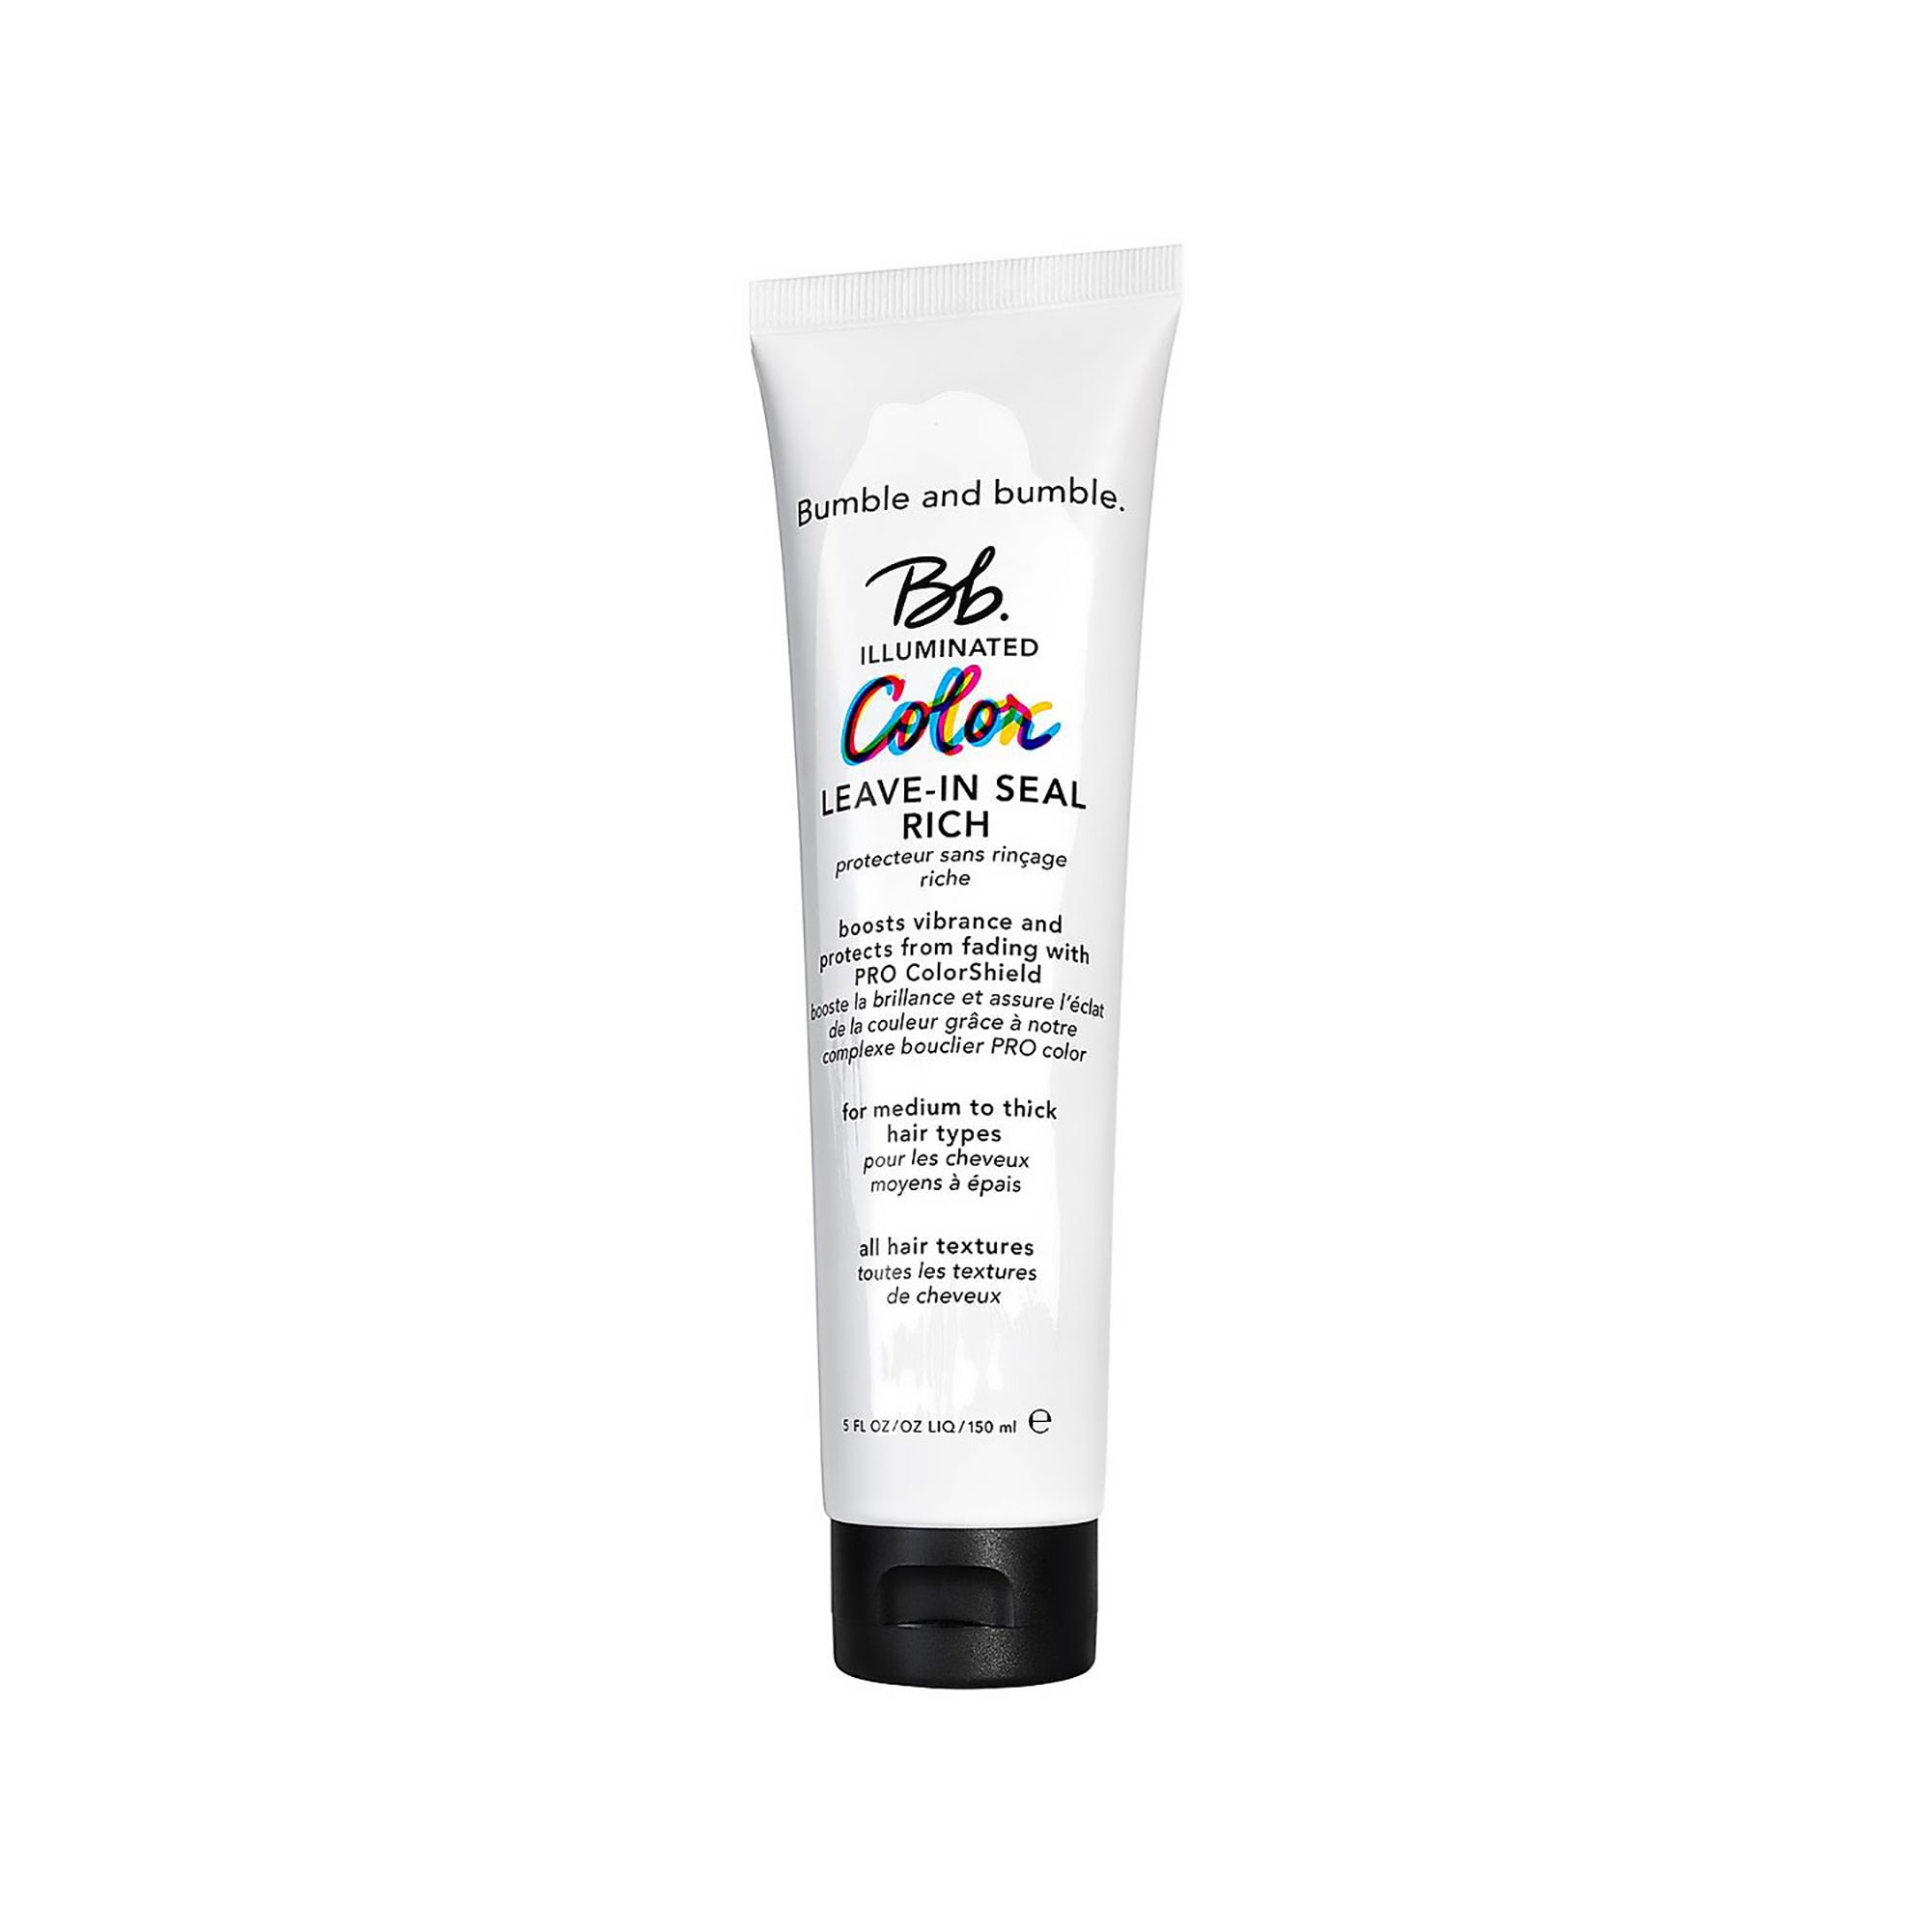 Bumble and Bumble Illuminated Color Vibrancy Seal Leave-In RICH - 5oz / 5 OZ